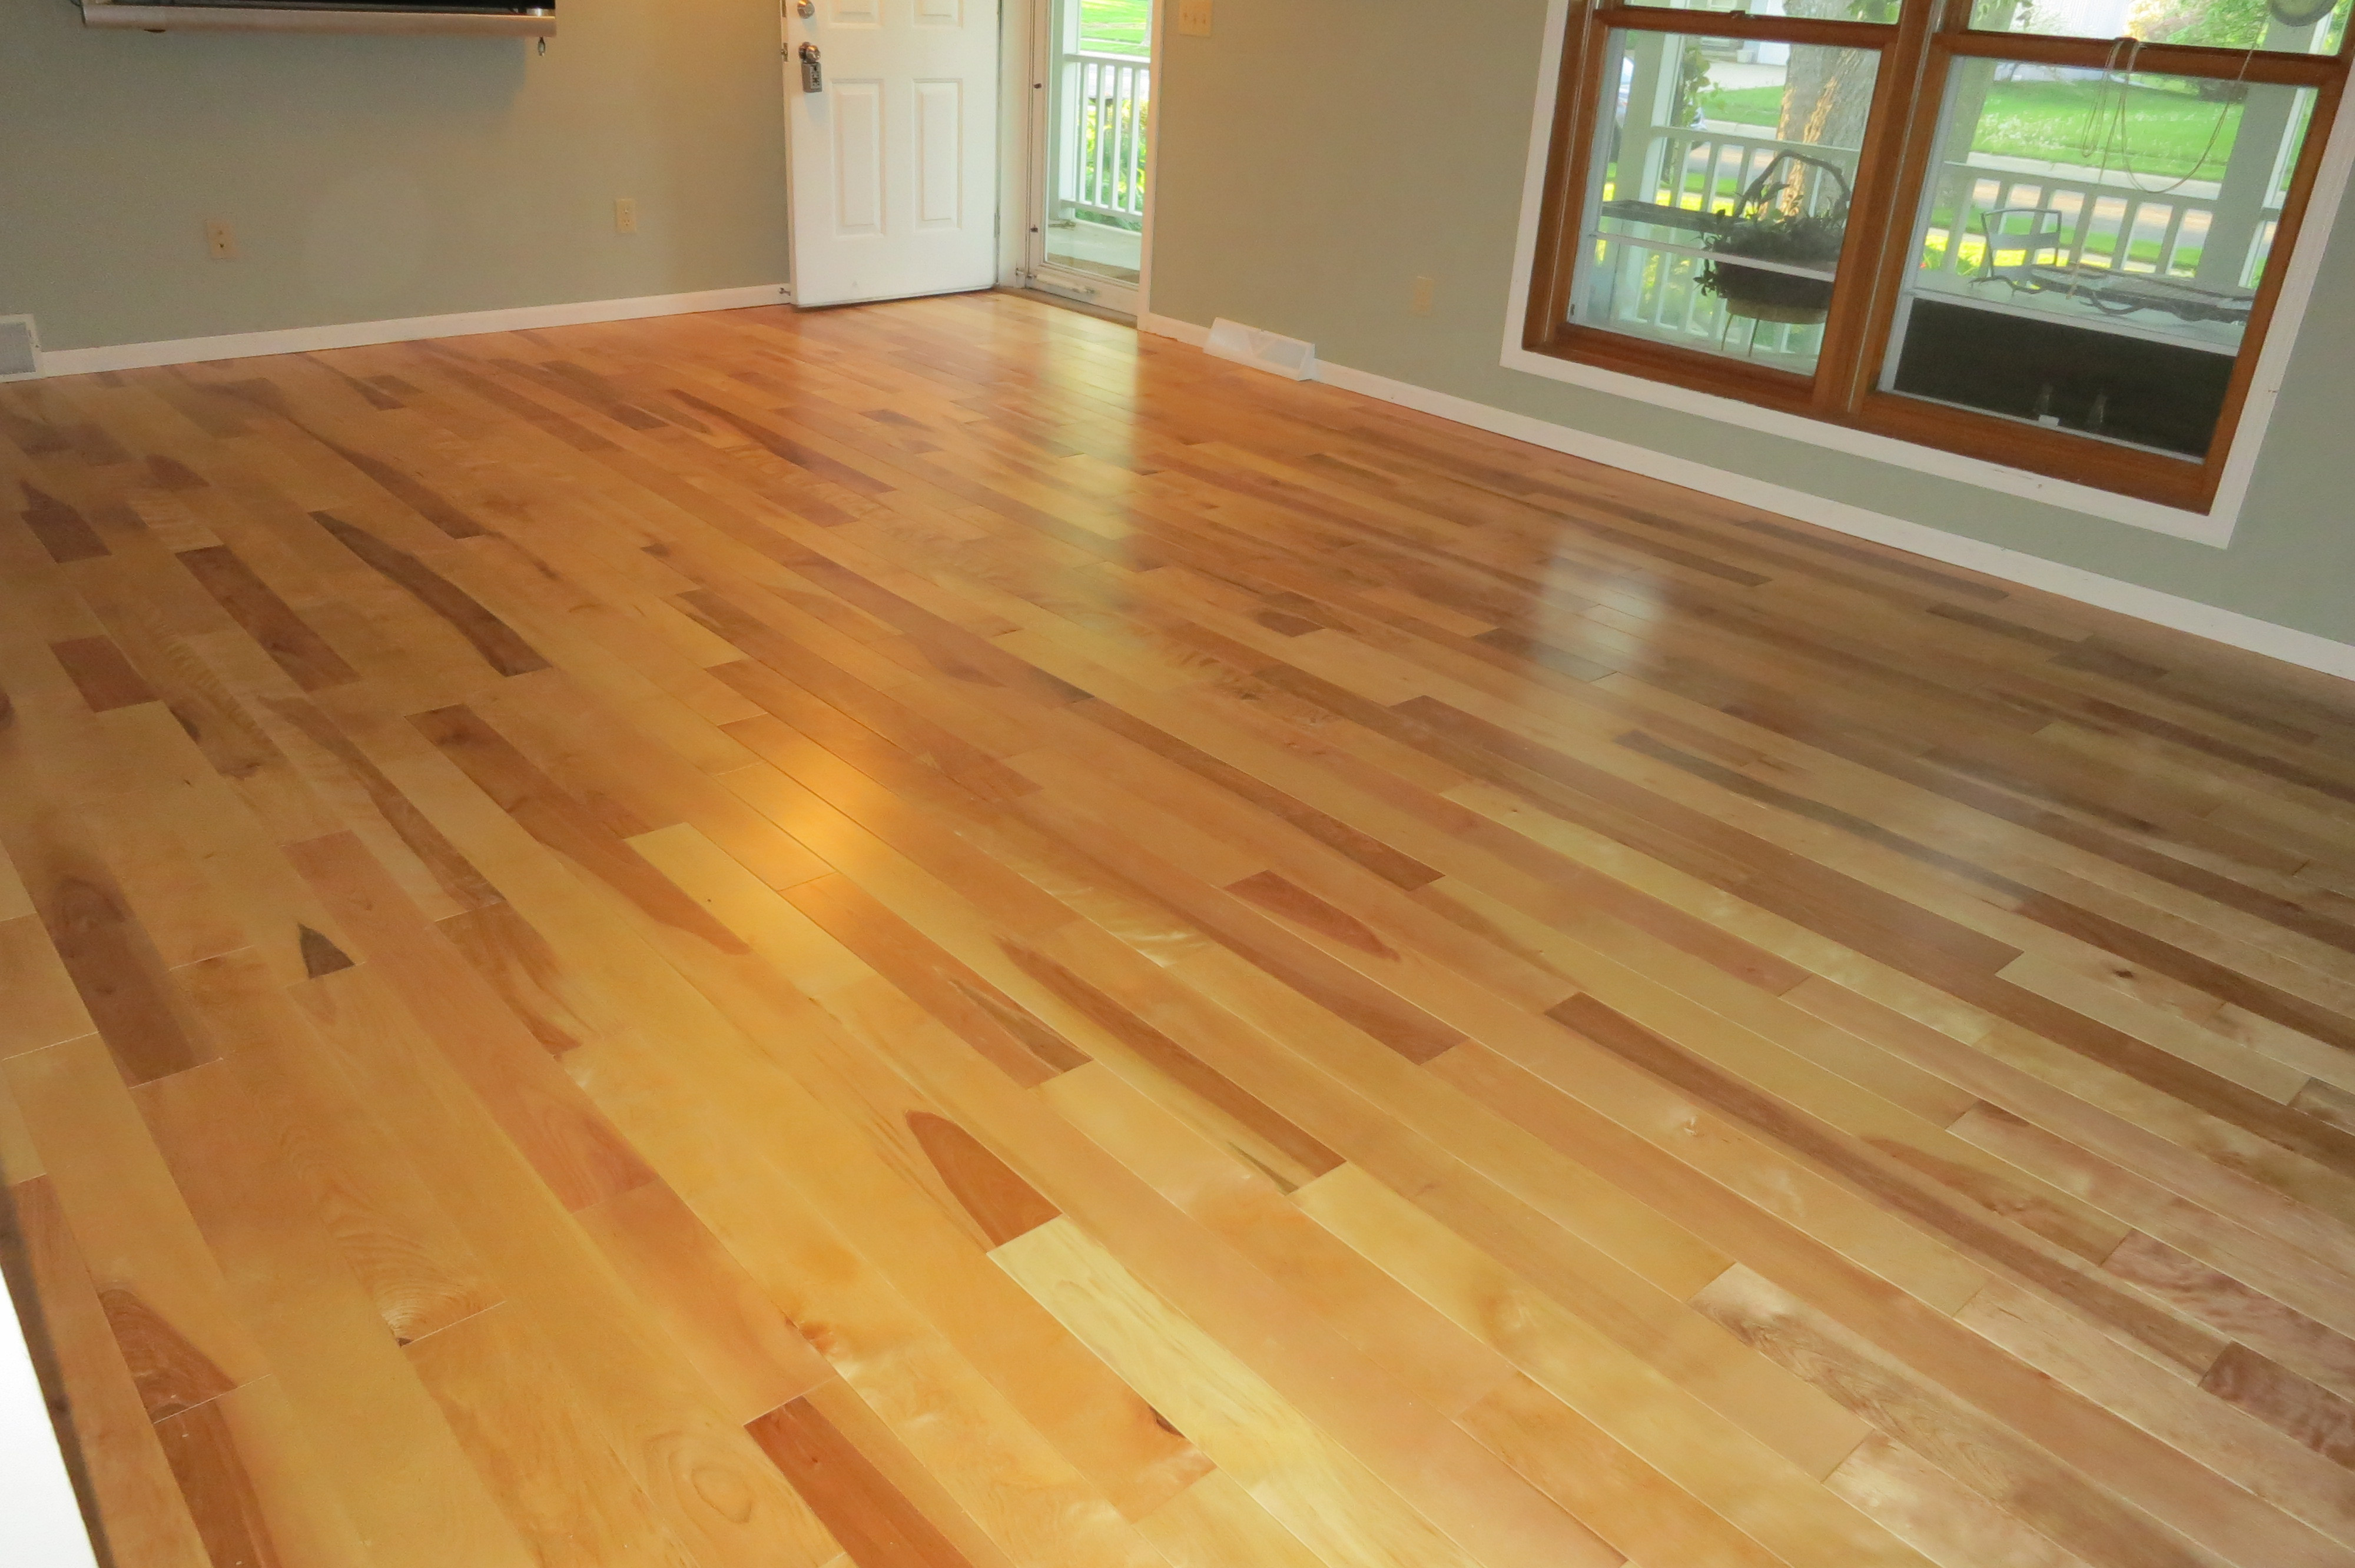 13 Great How to Refinish Hardwood Floors with Pet Stains 2024 free download how to refinish hardwood floors with pet stains of imperial wood floors madison wi hardwood floors hardwood floor within home a